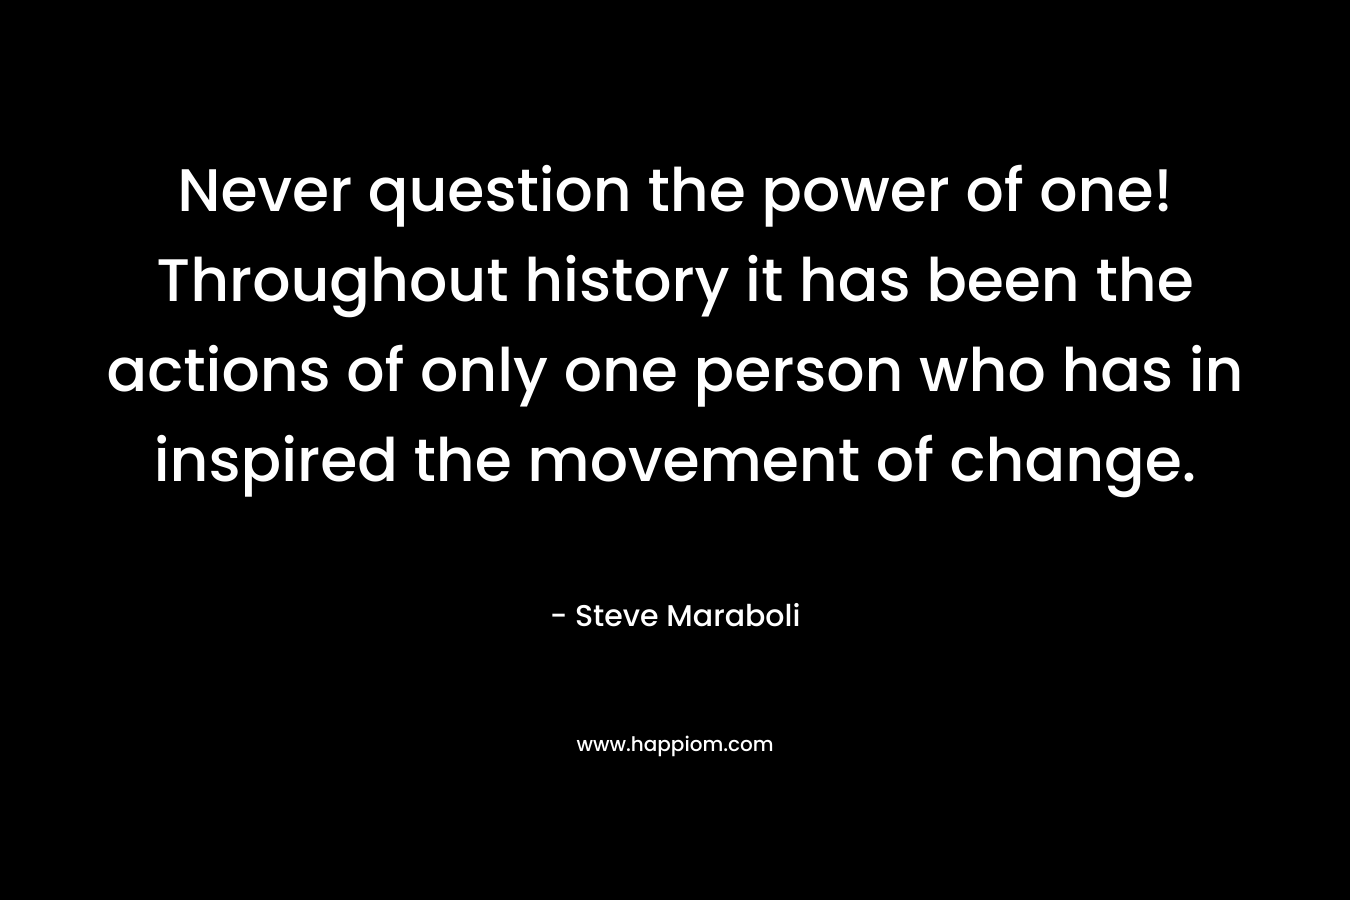 Never question the power of one! Throughout history it has been the actions of only one person who has in inspired the movement of change.